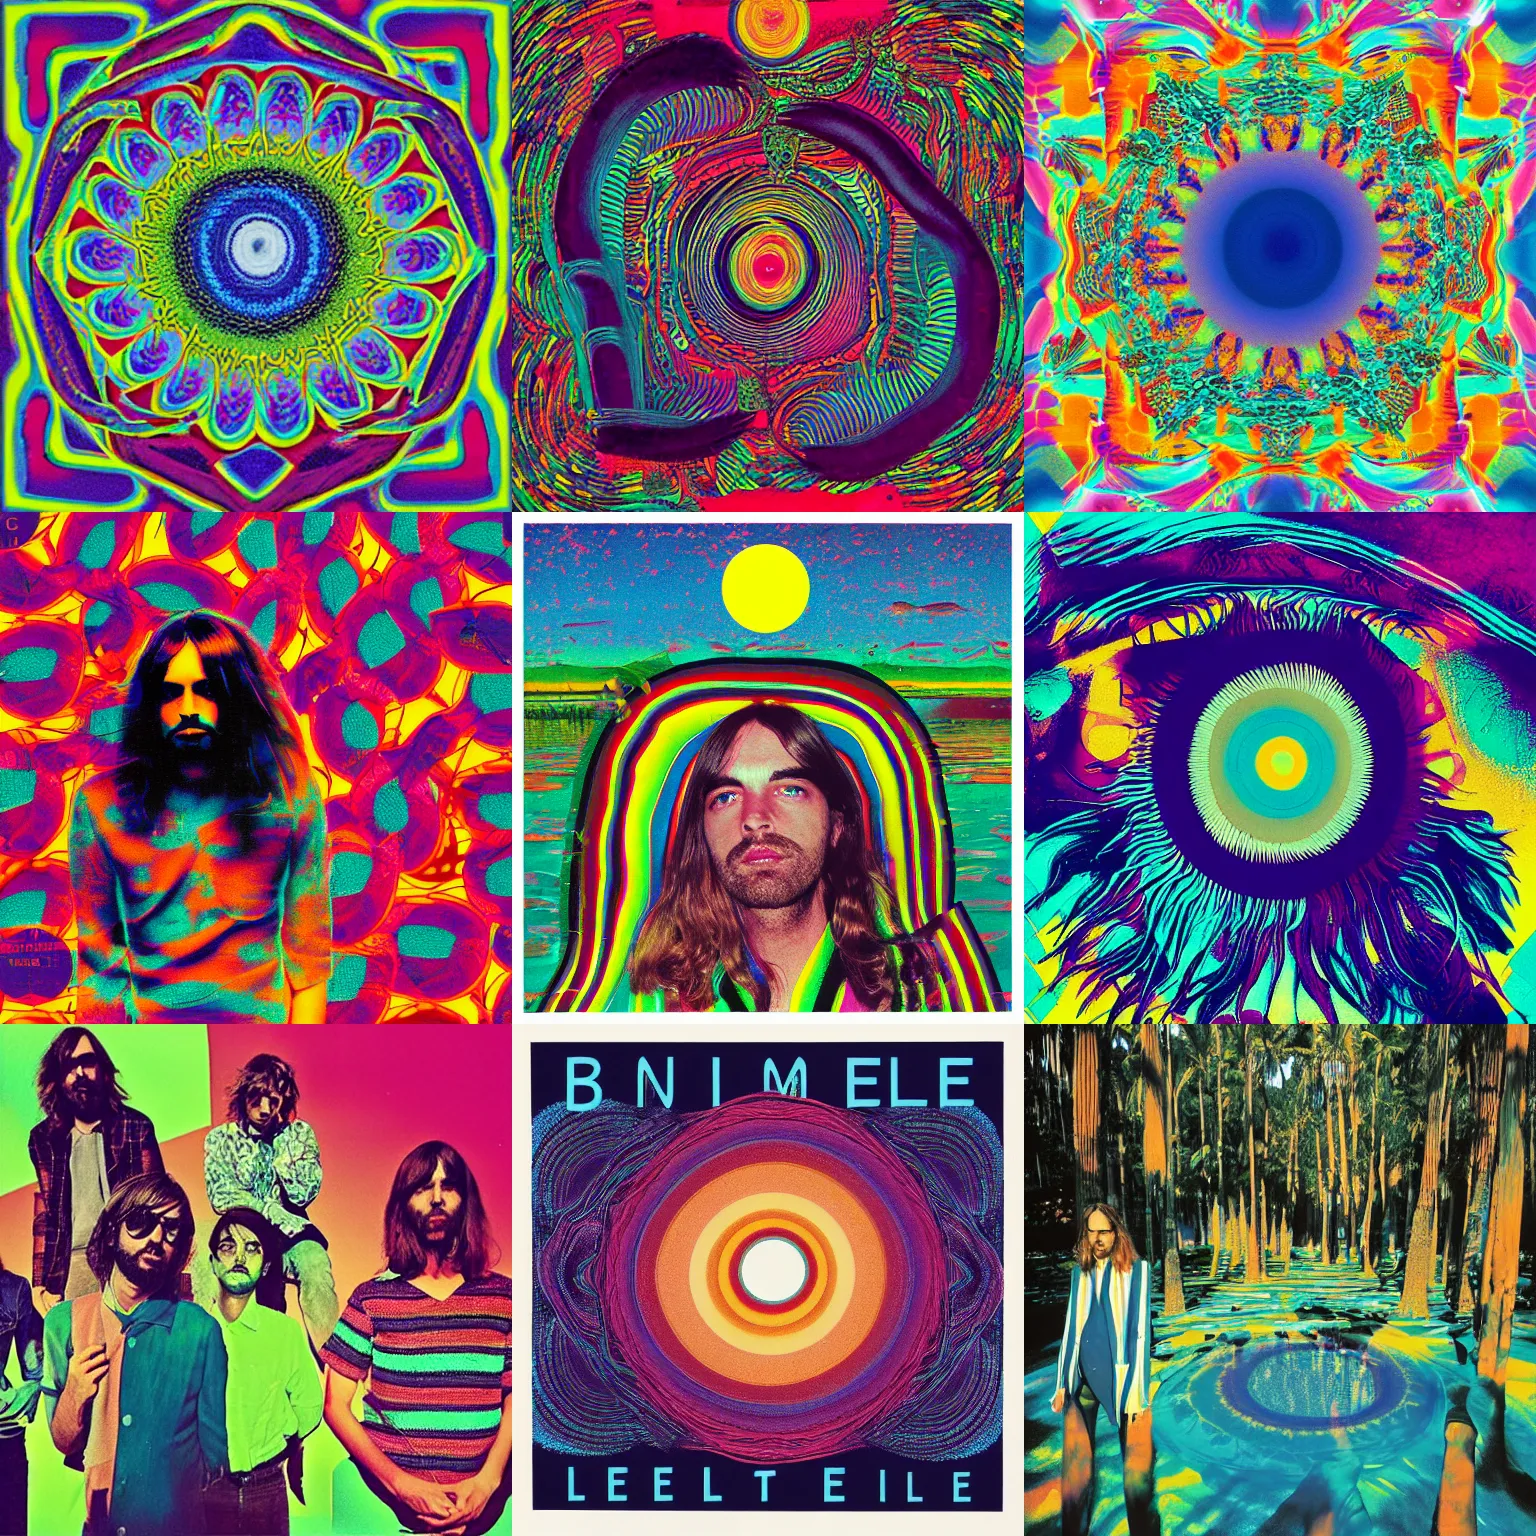 Prompt: Tame impala the less i know the better cd cover